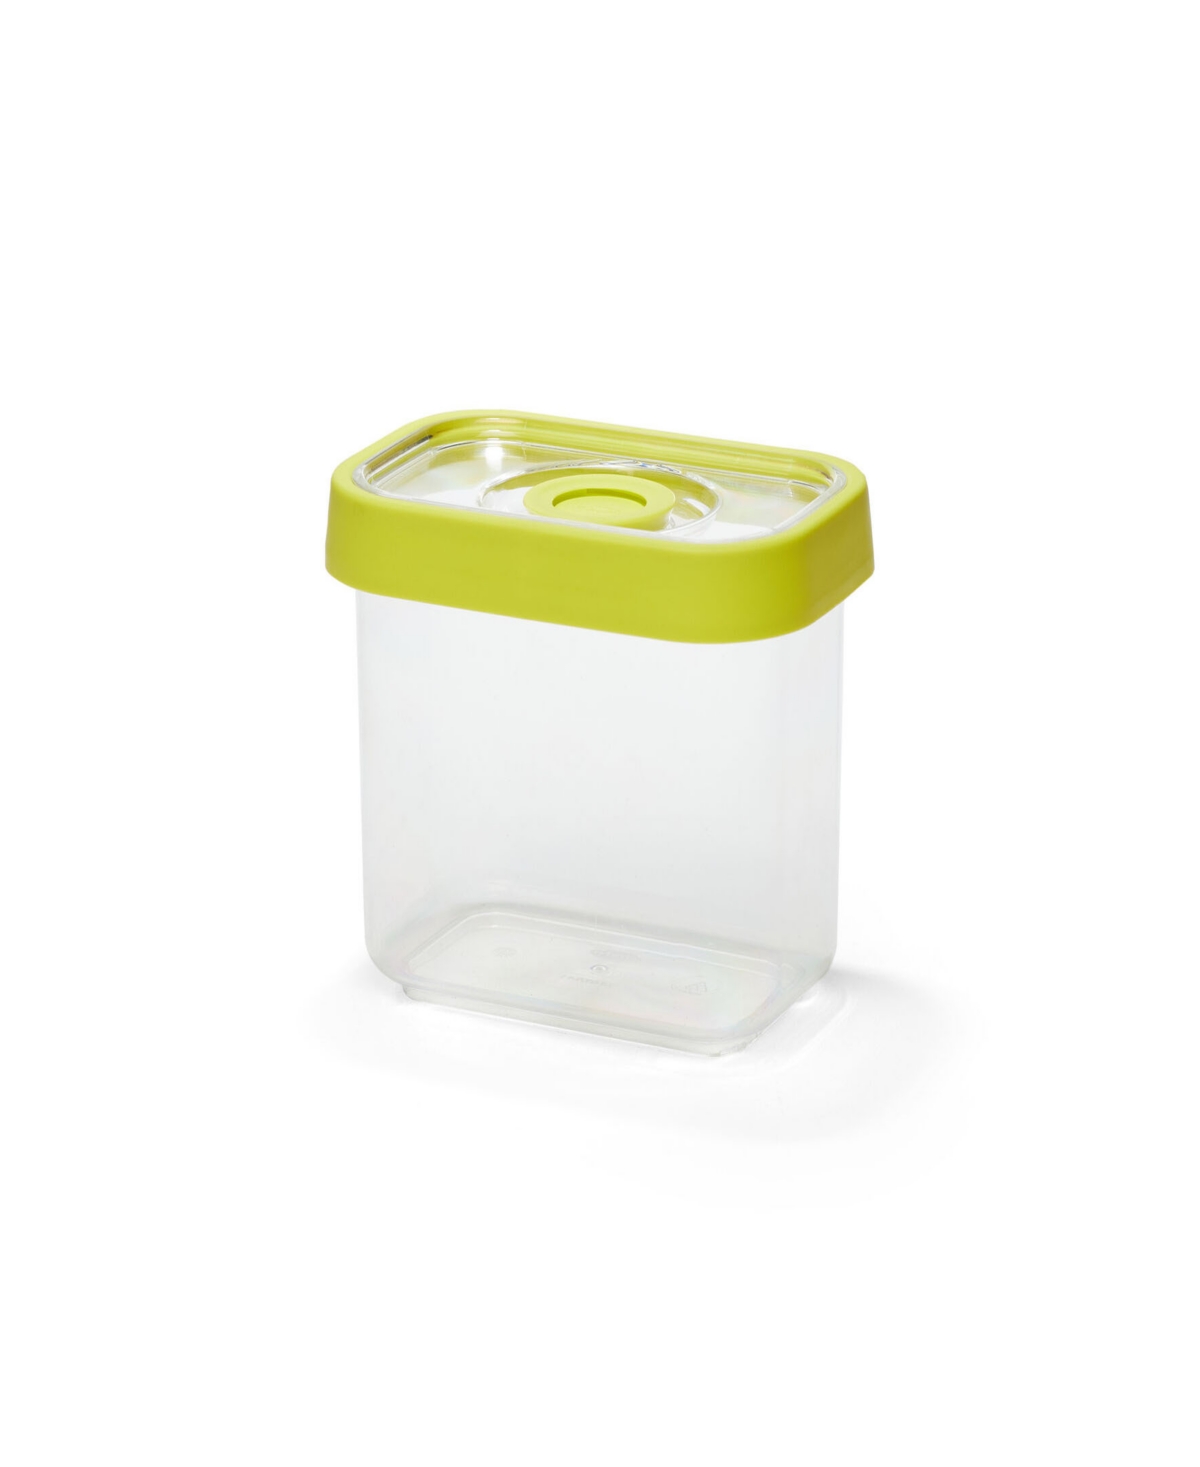 Taylor Produce Storage Container In Green